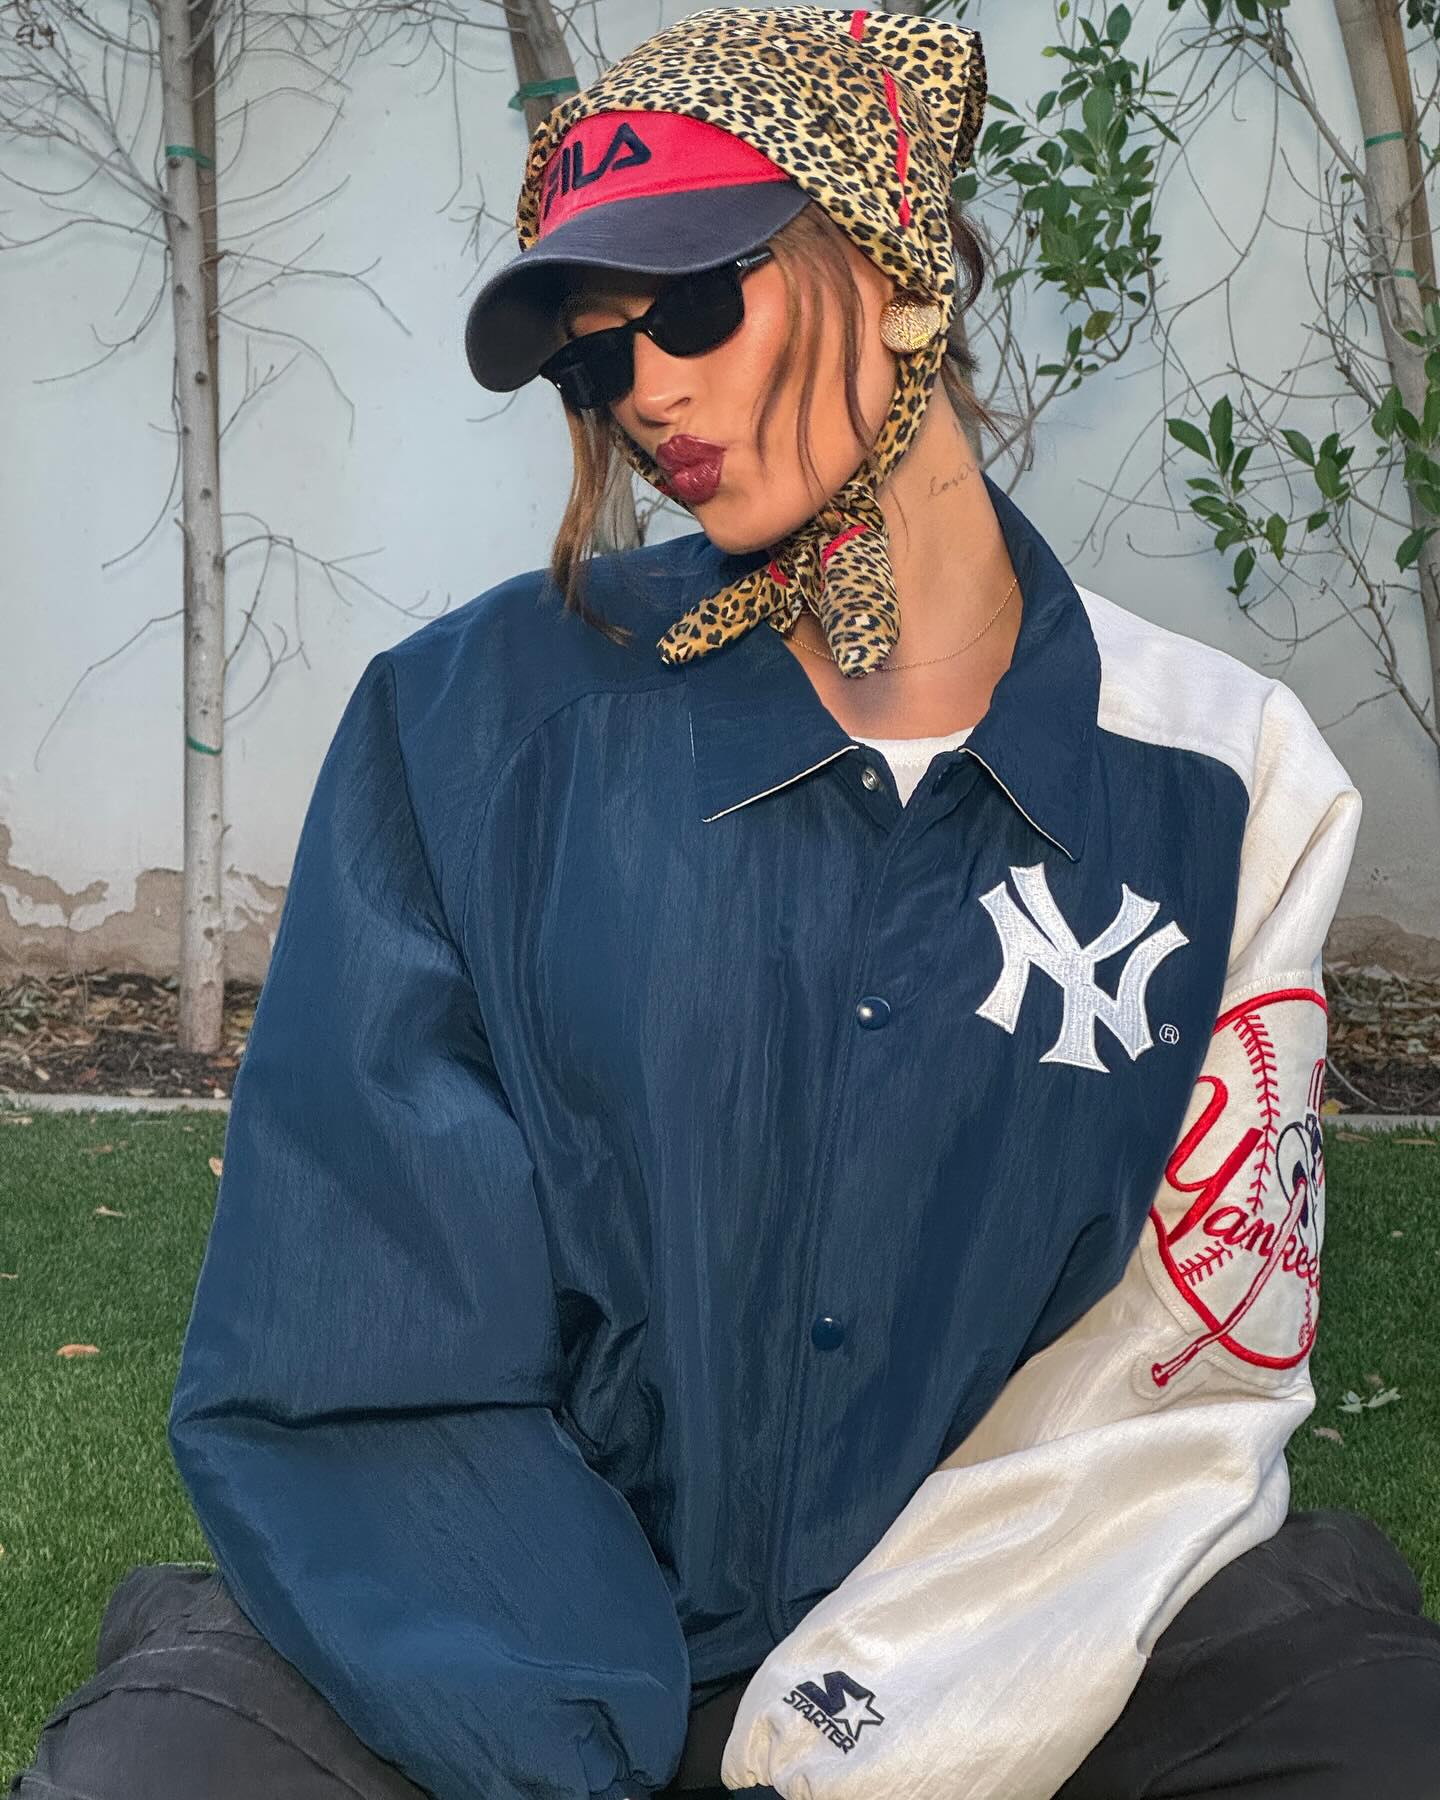 Hailey's Coachella outfit featured an oversized jacket